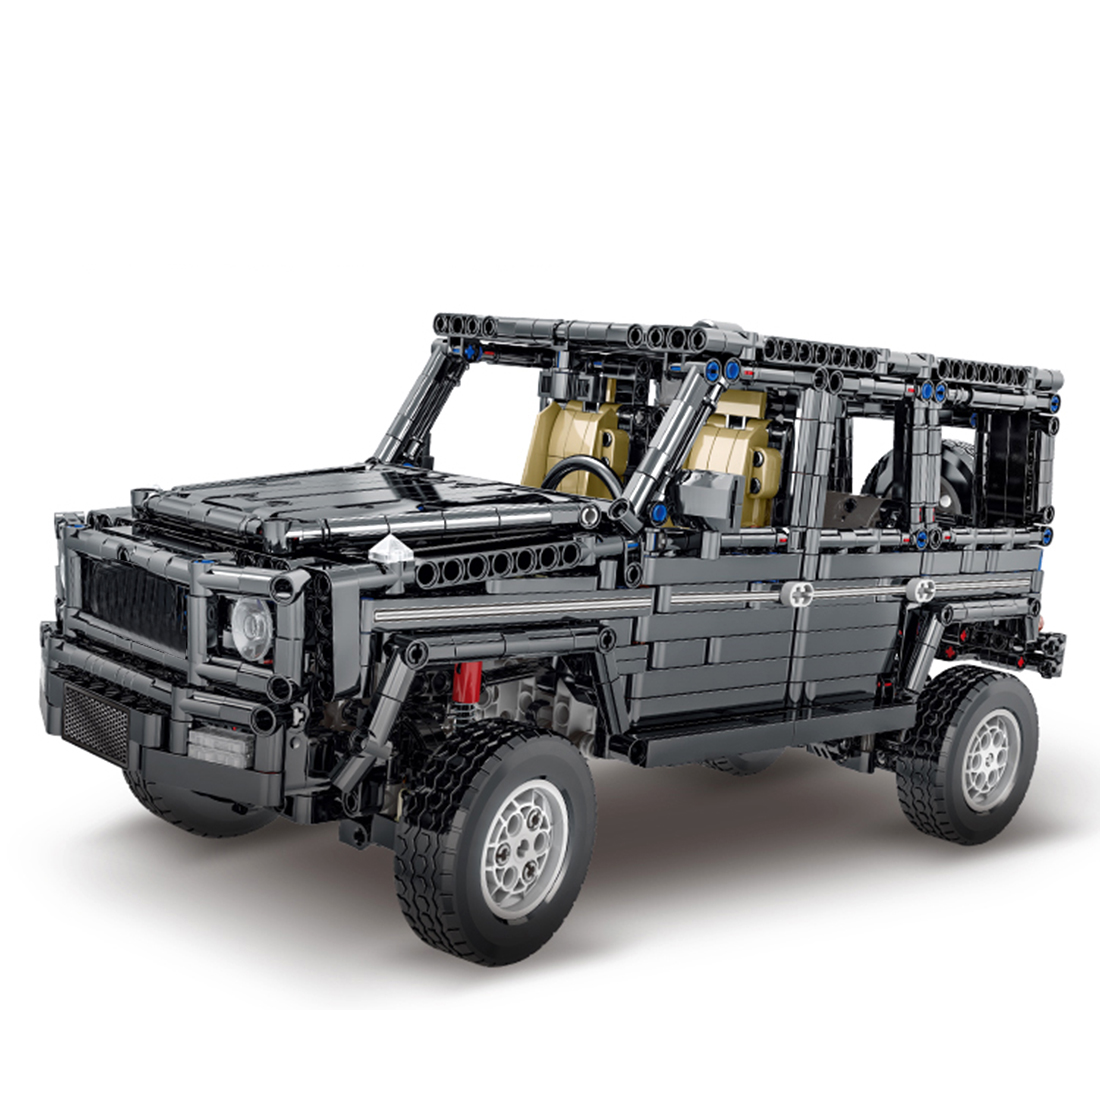 1850Pcs MOC Static Off-road Vehicle Bricks Model Assembly Building Block  Car Set (This Product is not manufactured or sold by Lego, and have nothing  to do with Lego)